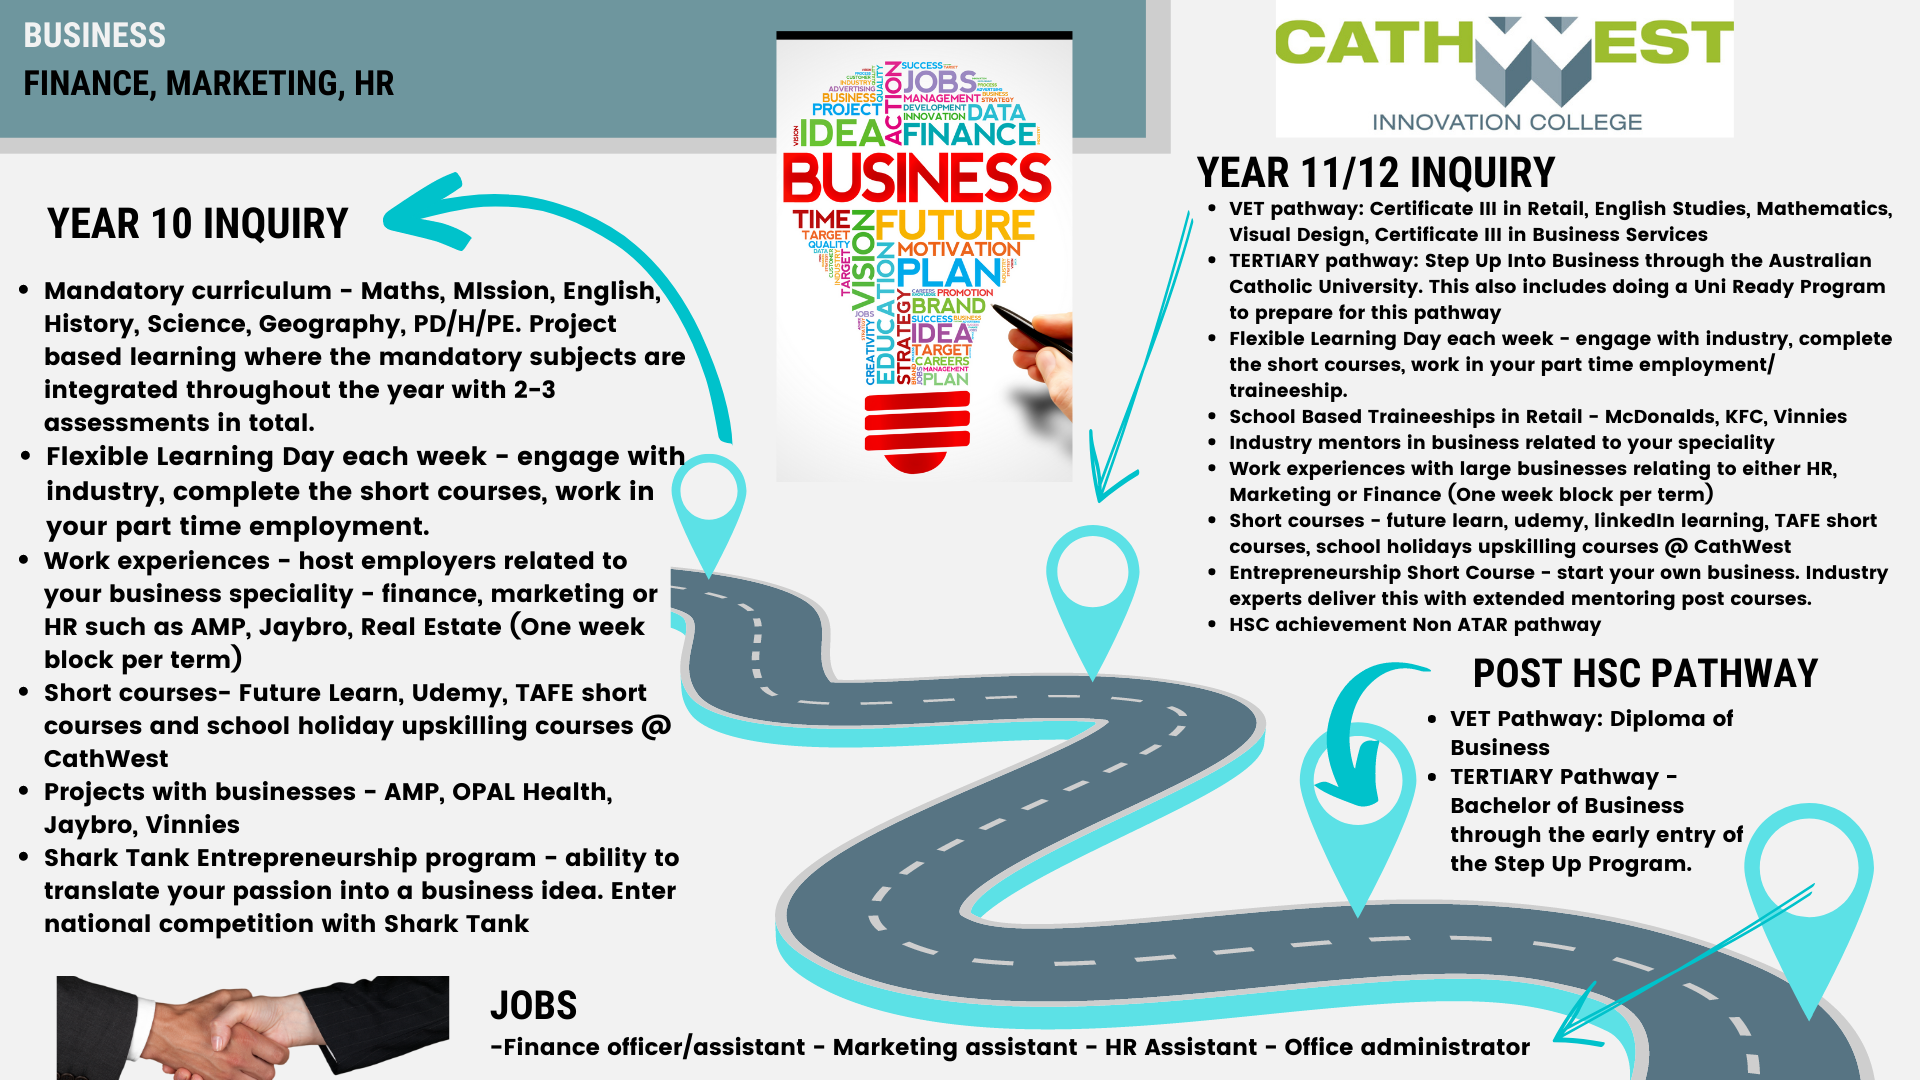 Business Career Pathways at CathWest Innovation College